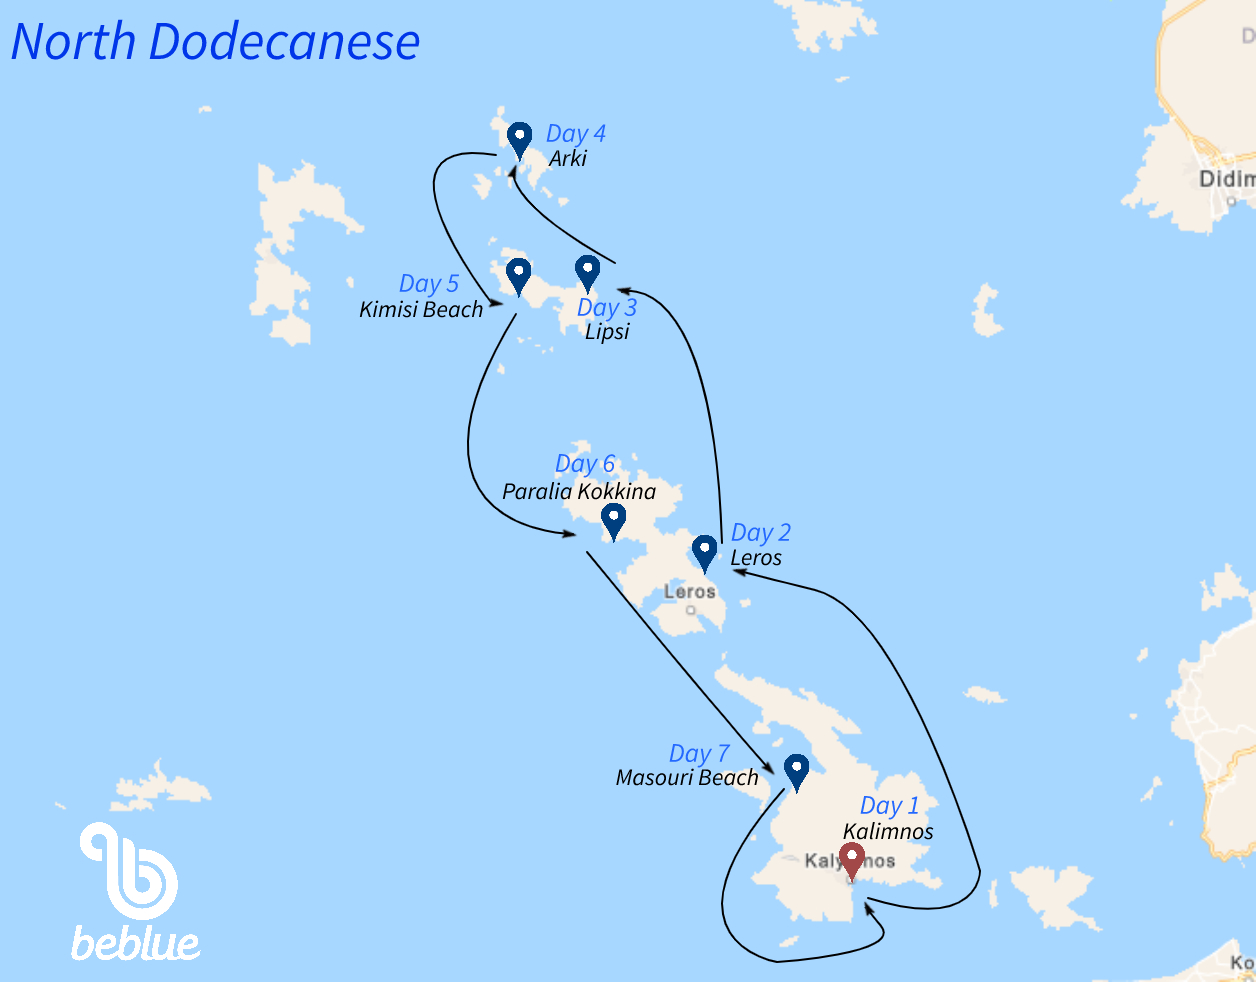 Isole del Dodecaneso nord - ID 103